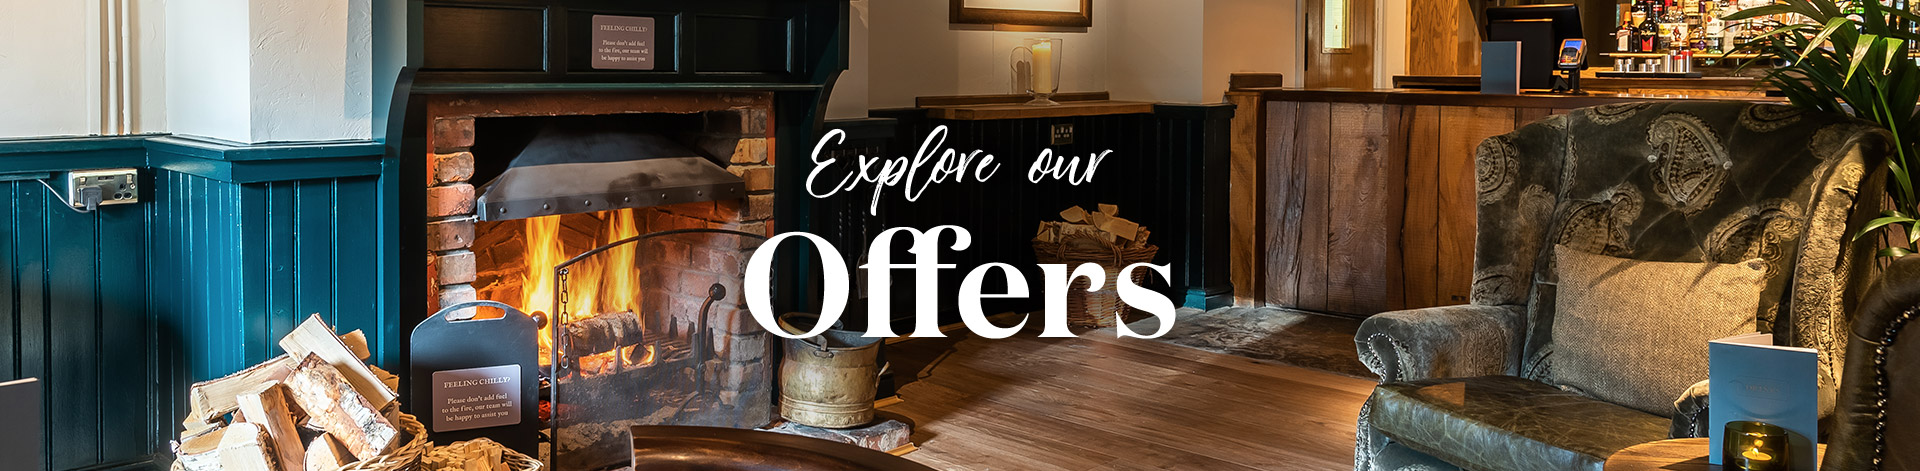 Our latest offers at The Fitzwilliam Arms